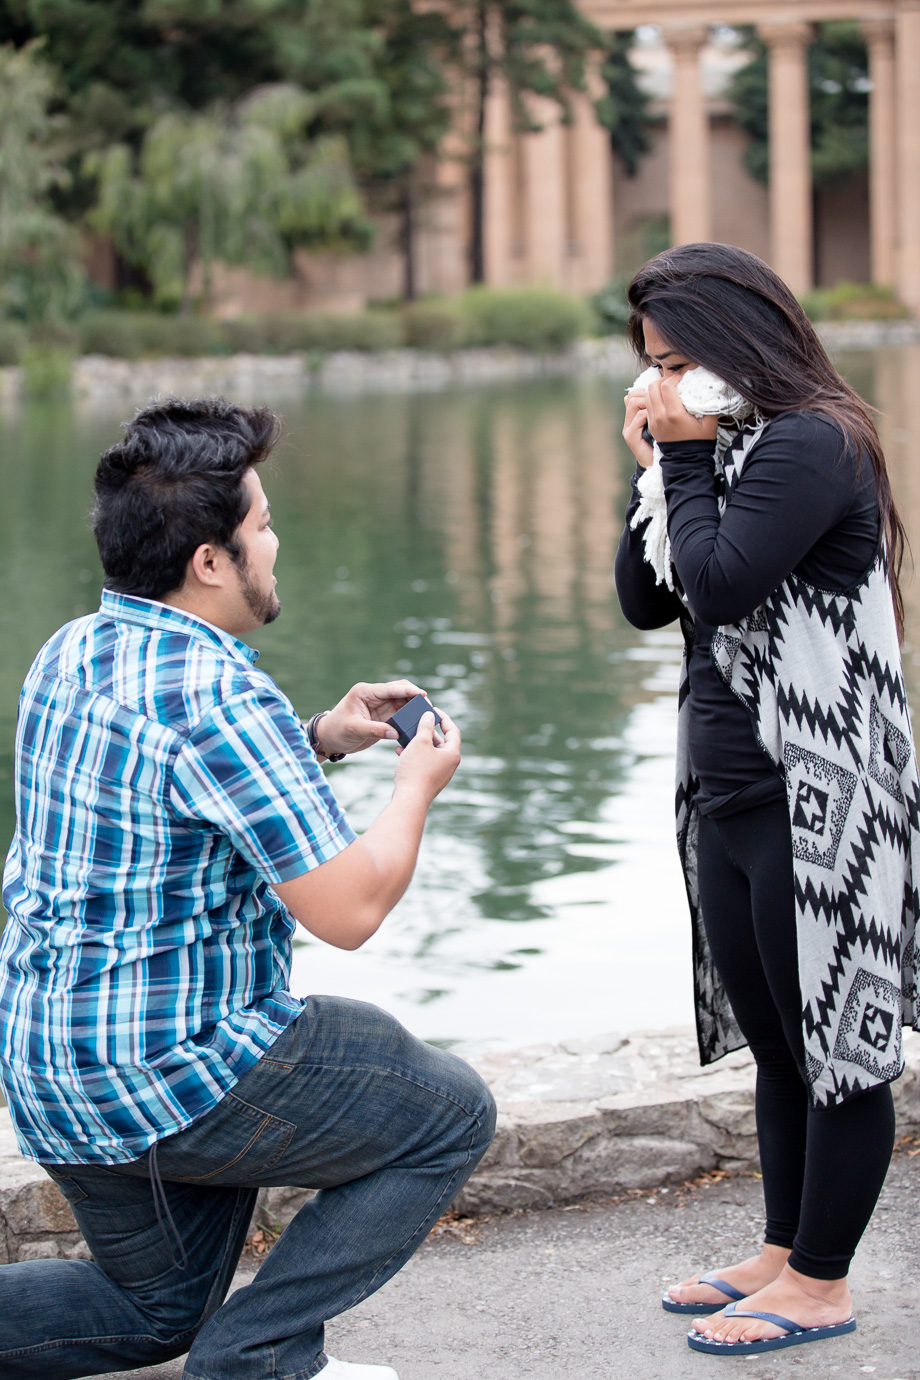 Shock and joy from future bride when seeing the ring for the first time - proposal at Palace of Fine Arts